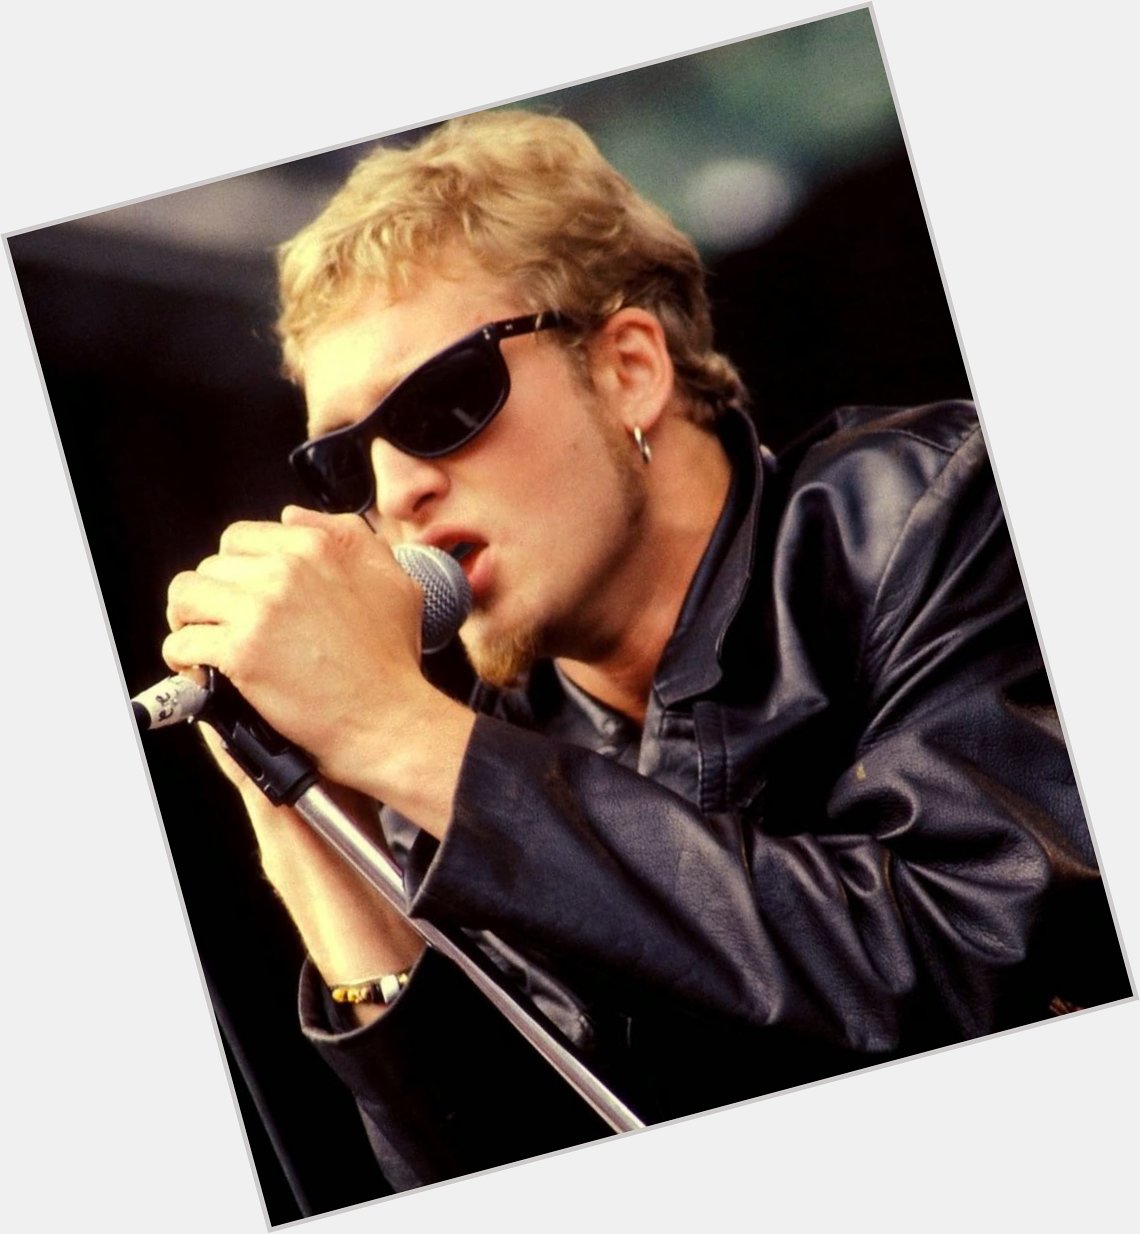 Happy birthday to Layne Staley, born on this day in 1967.  